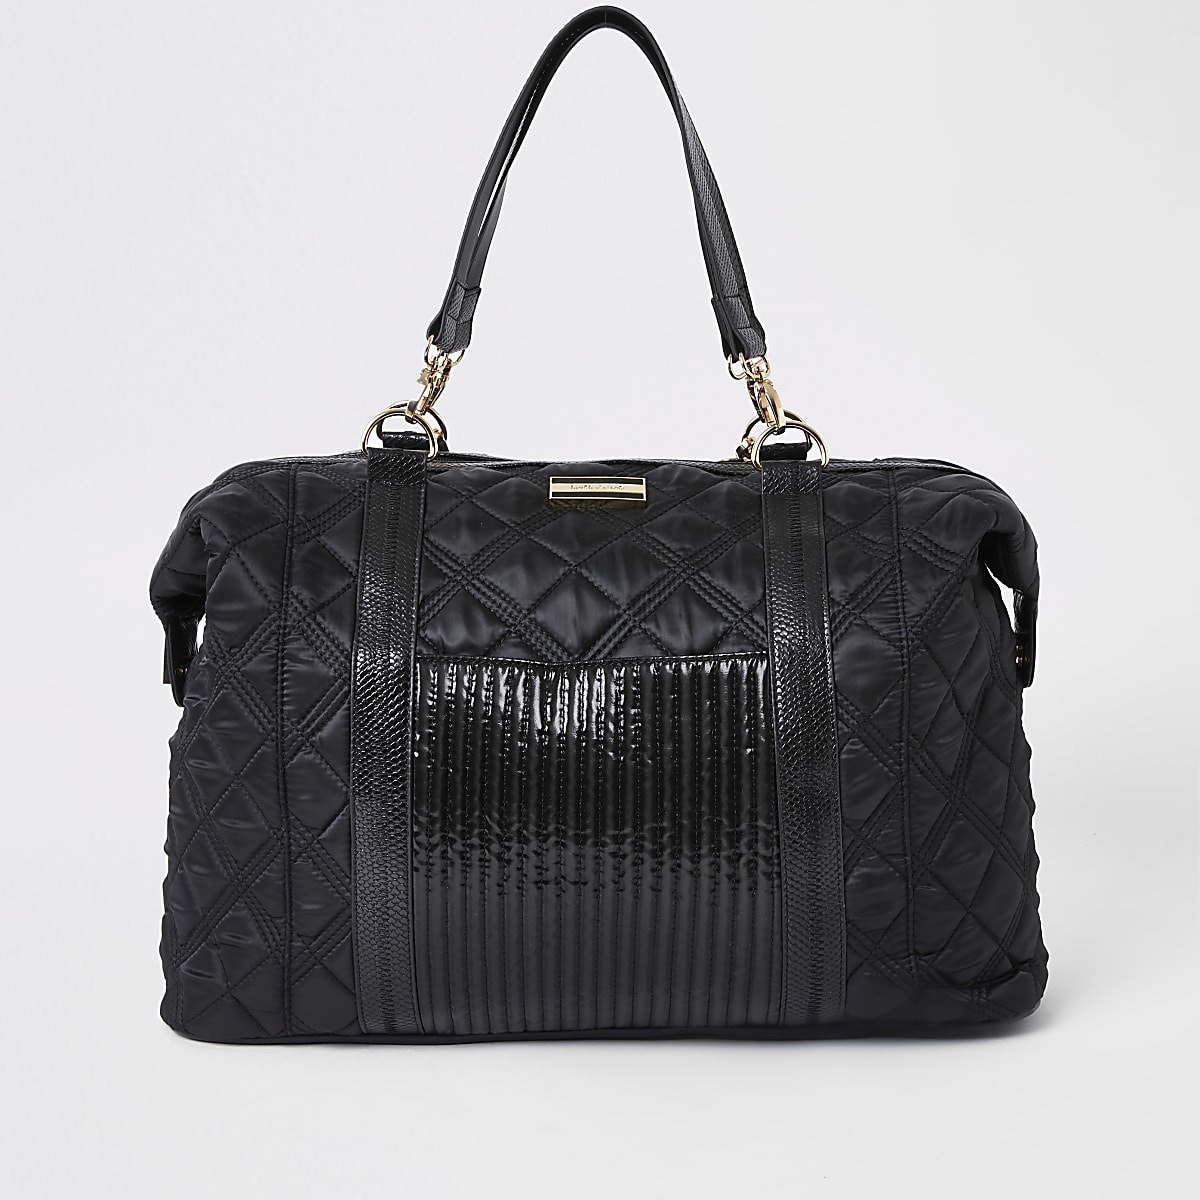 Black quilted weekend travel bag | River Island